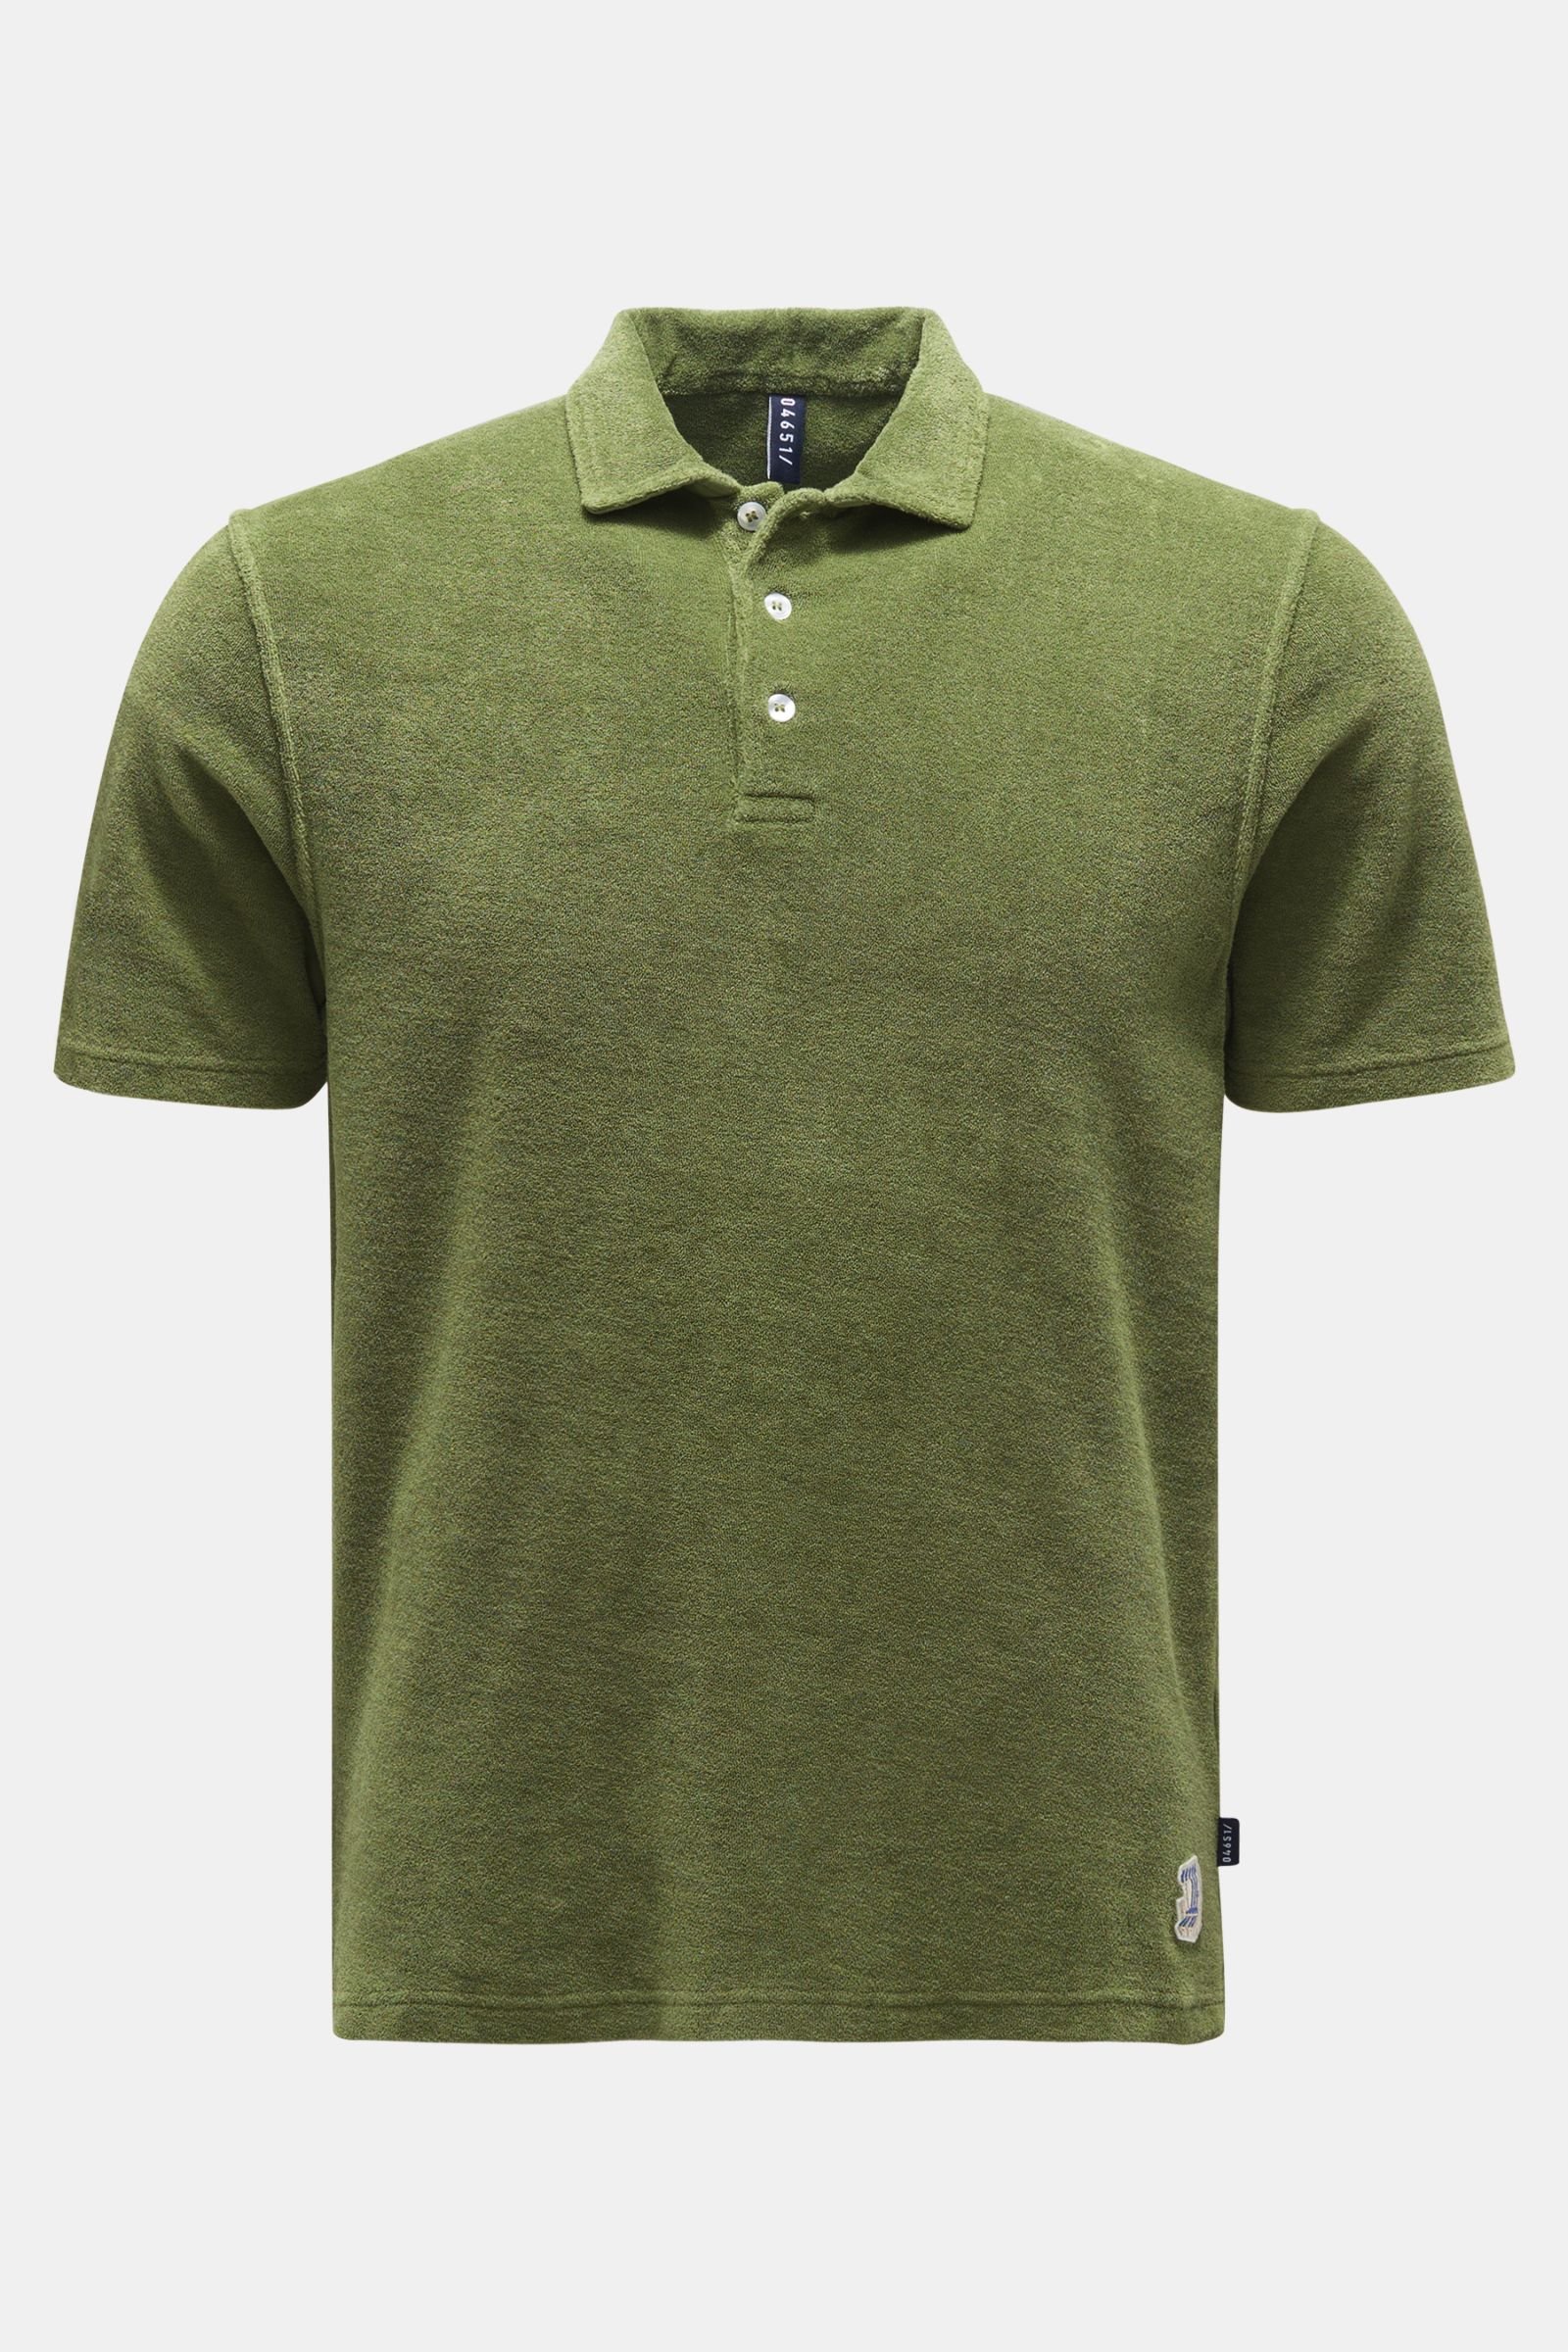 Terry polo shirt olive